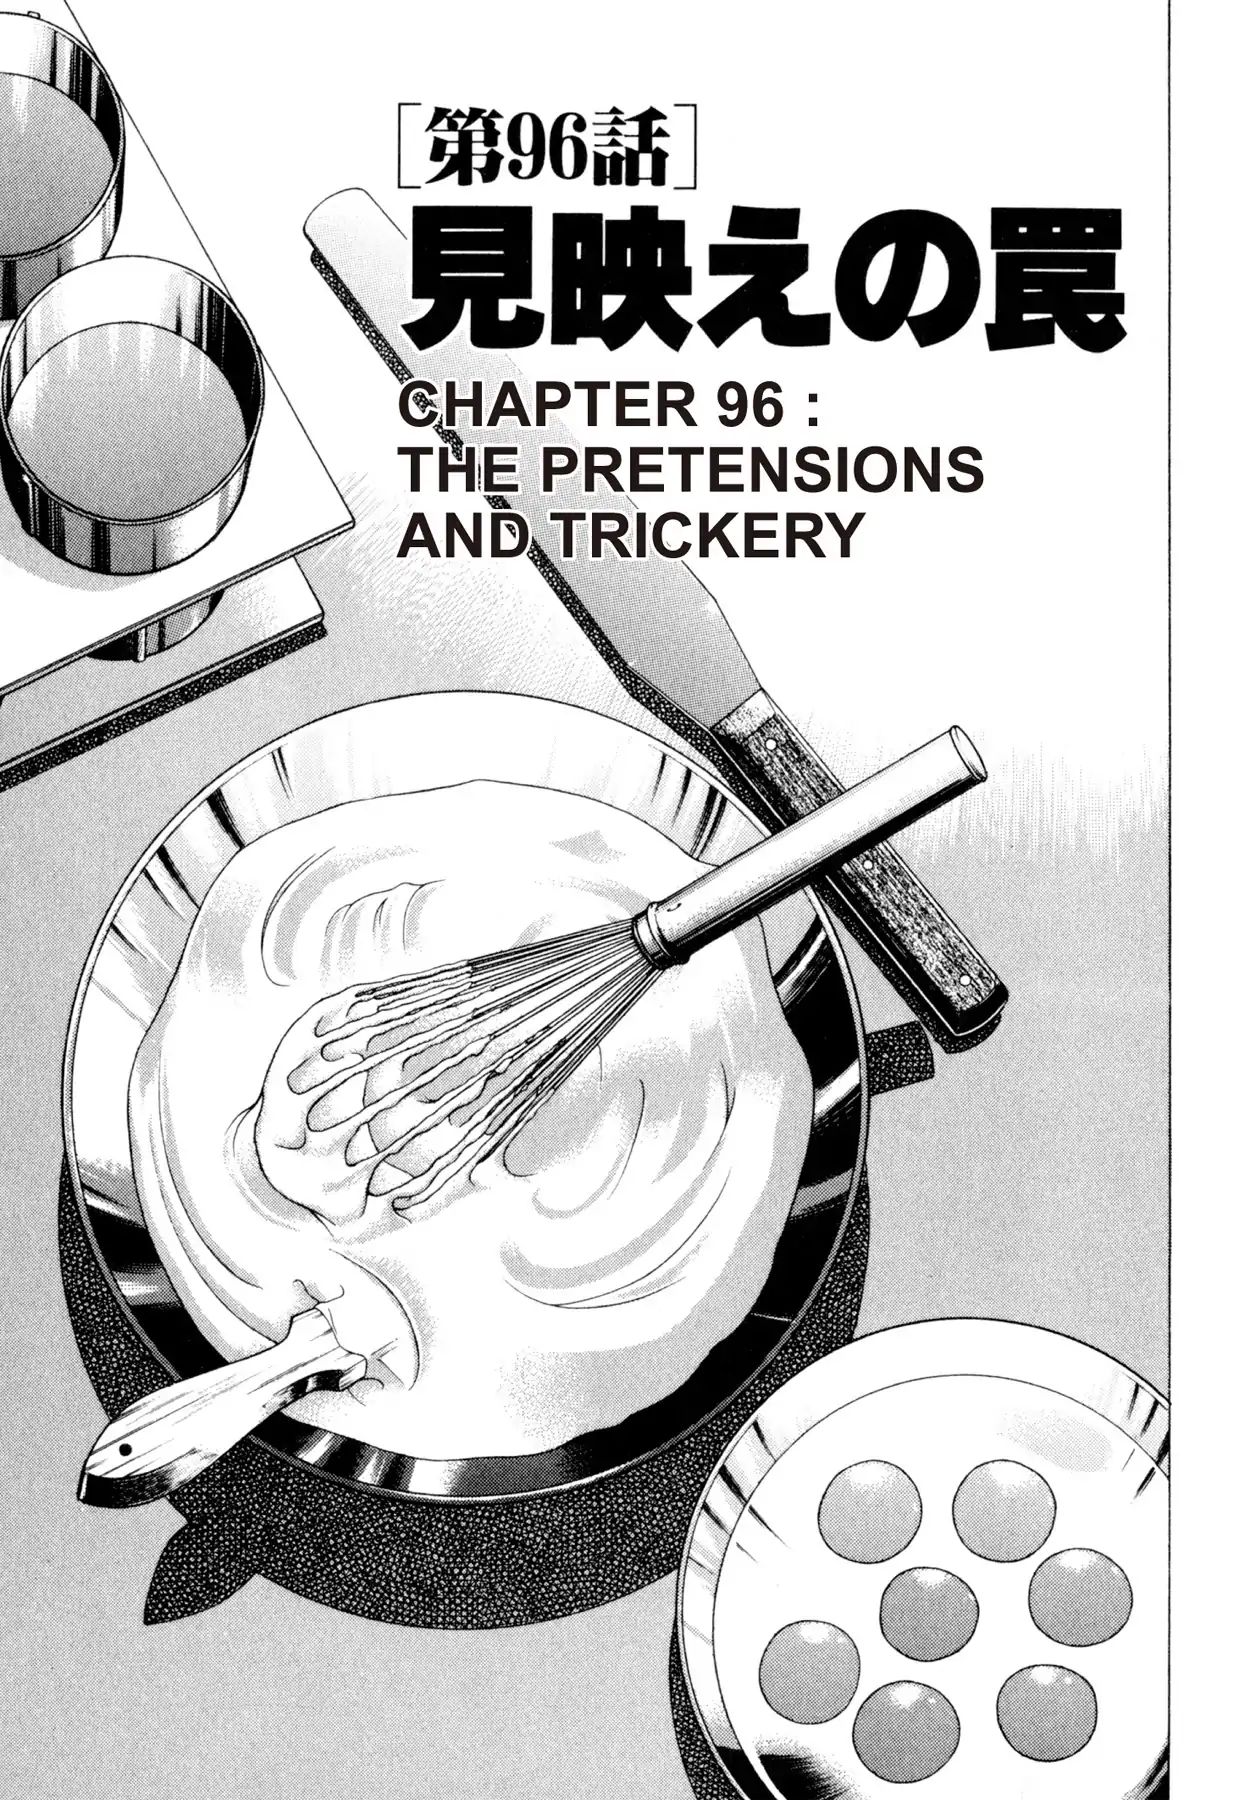 Shoku King VOL.11 CHAPTER 96: PRETENSIONS AND TRICKERY